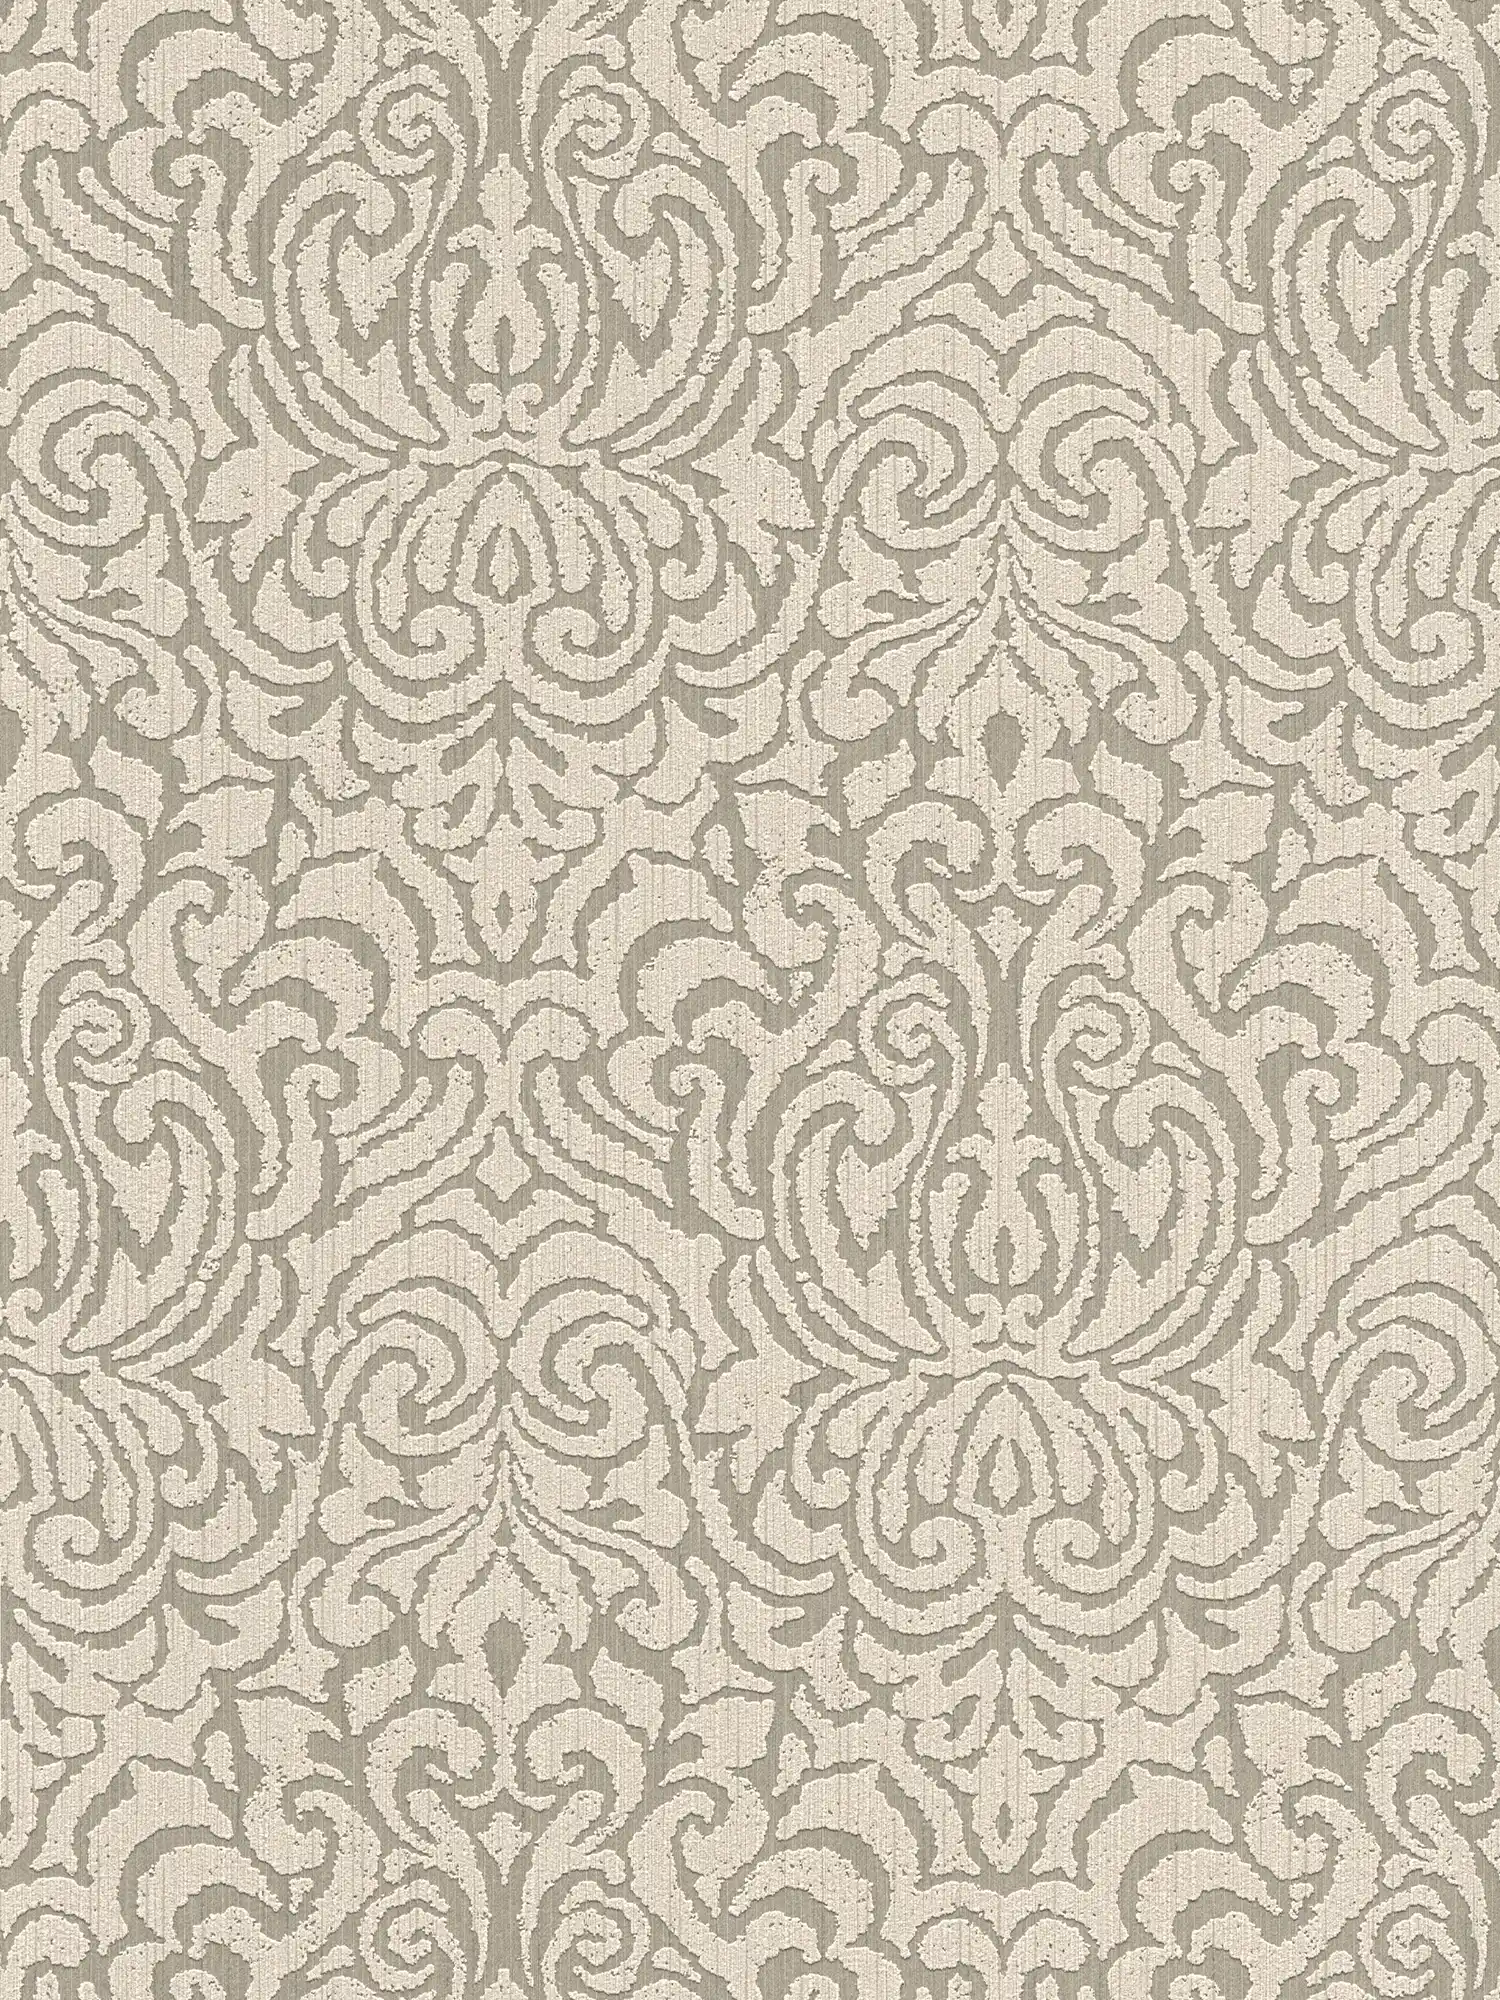 wallpaper ornaments in used look with texture effect - beige, brown
